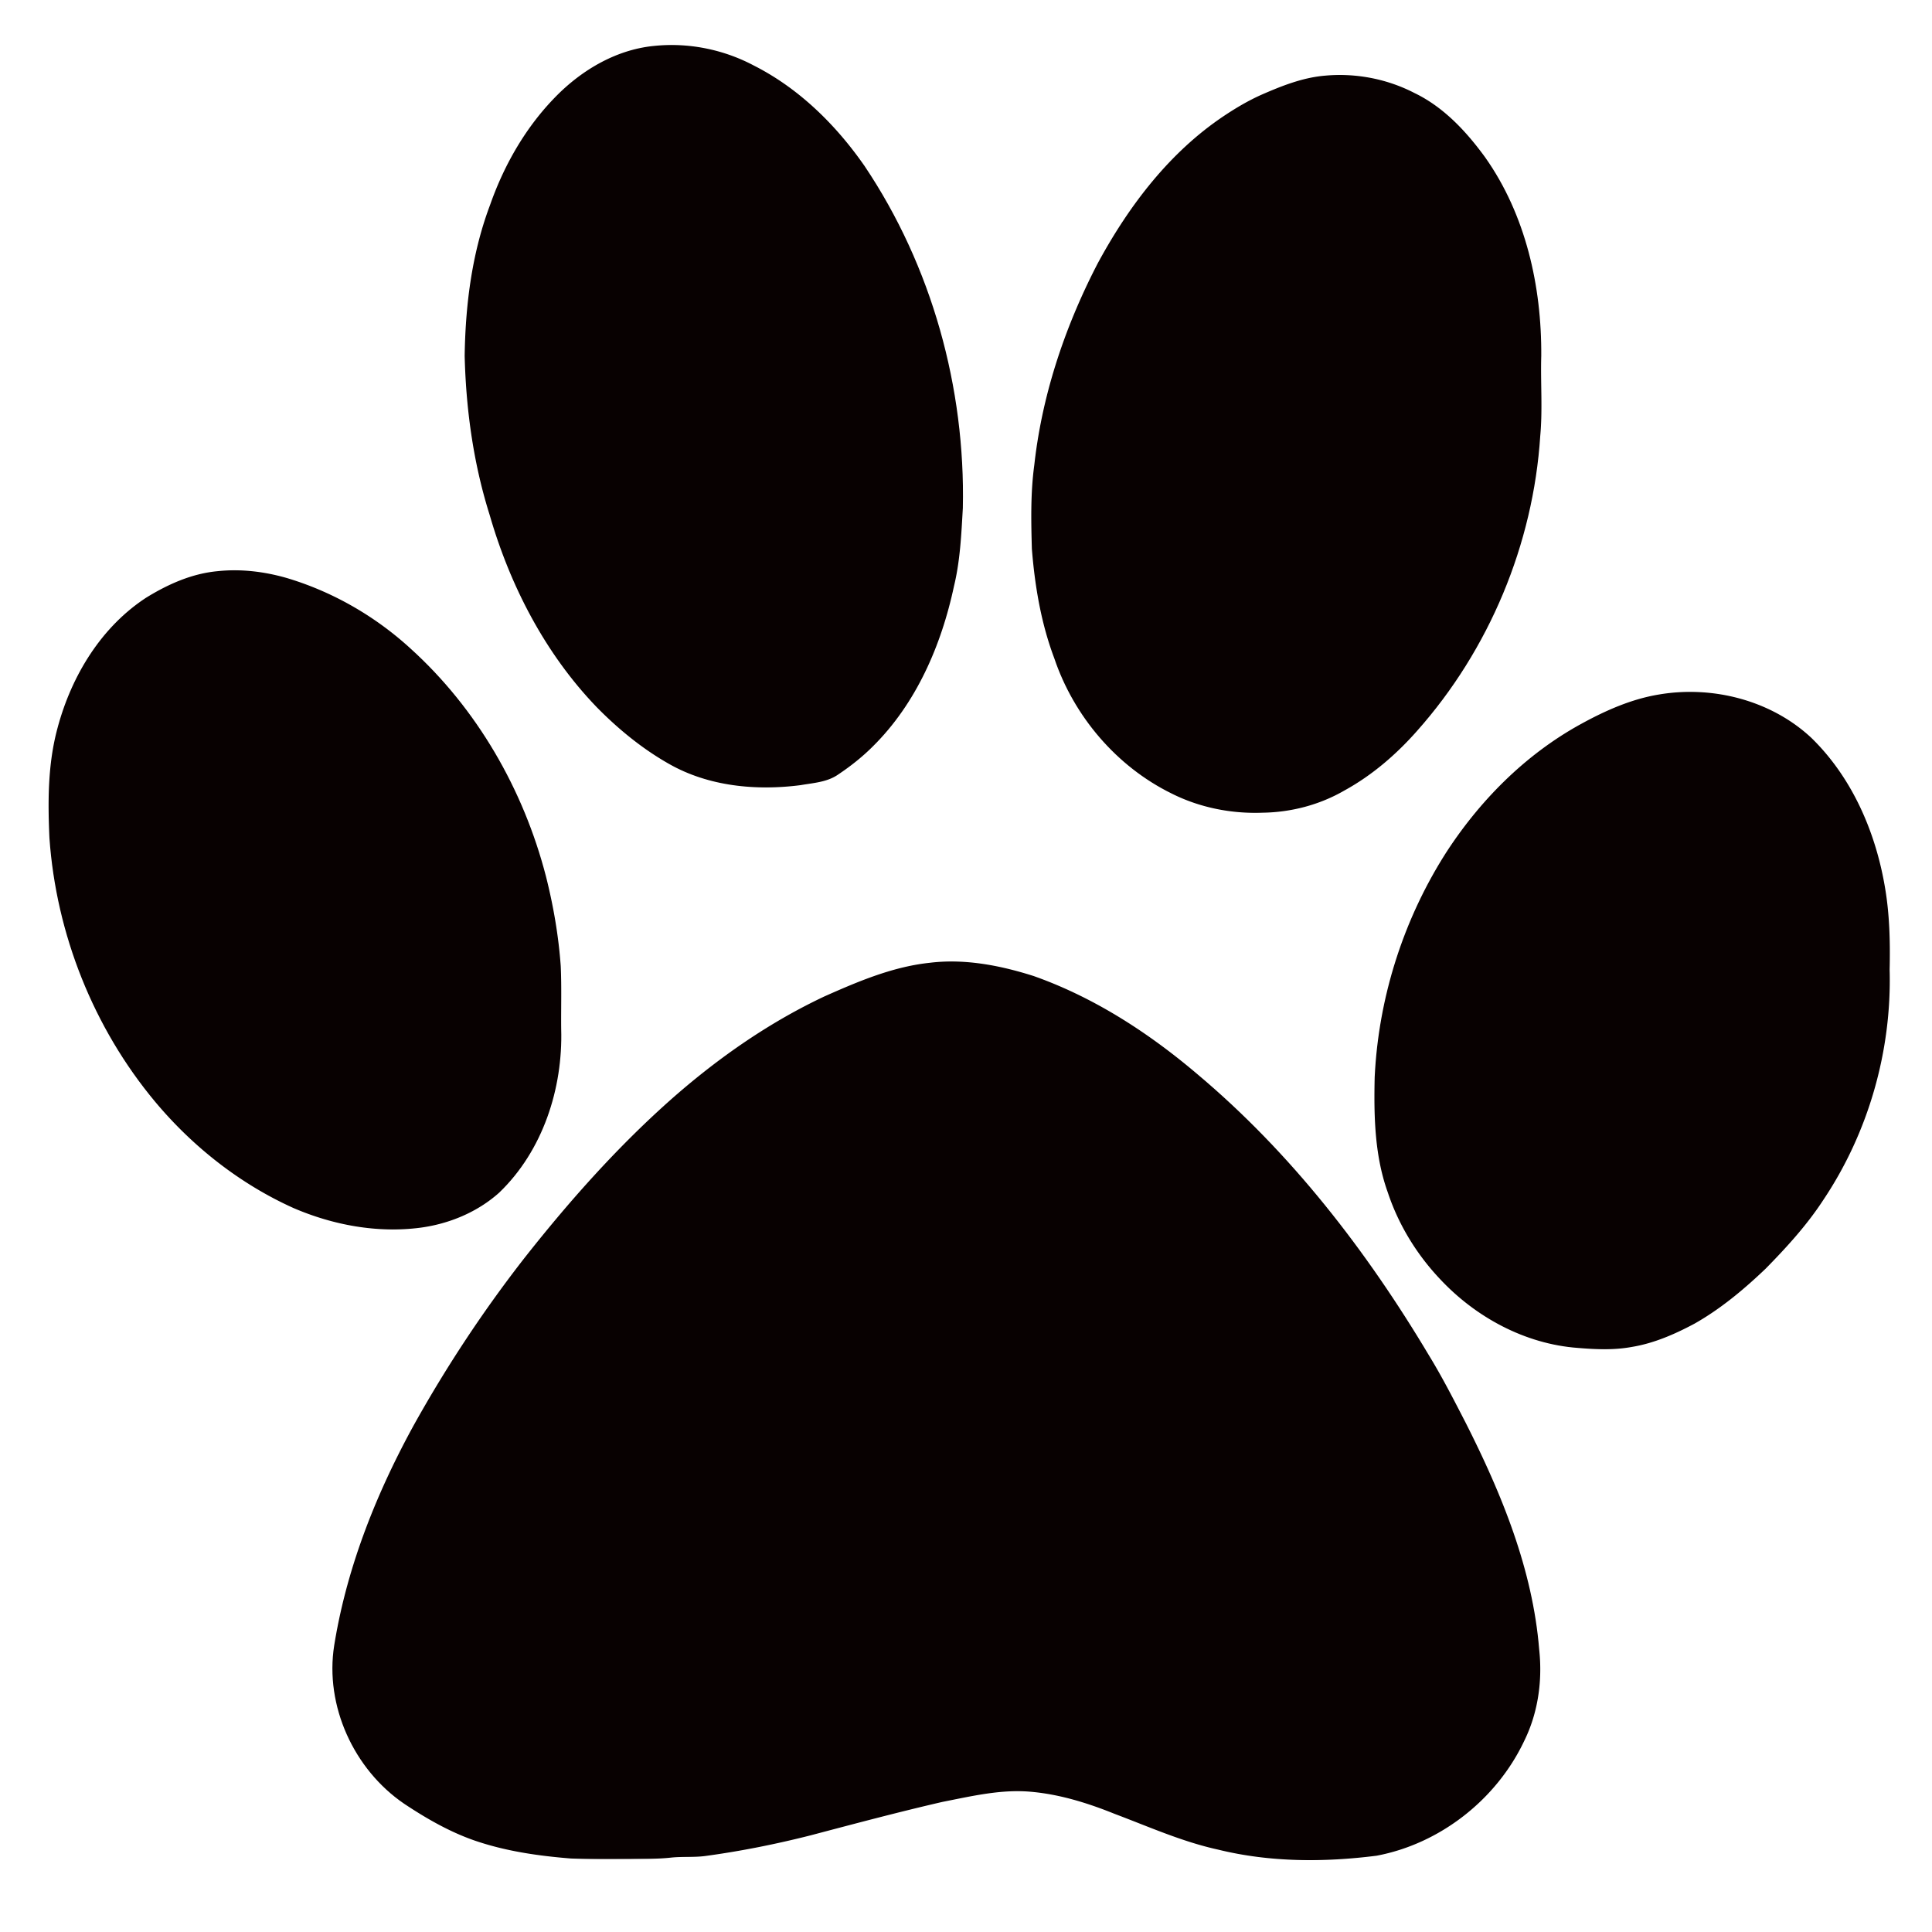 Tiger paw print outline clip art at vector clip art - dbclipart.com